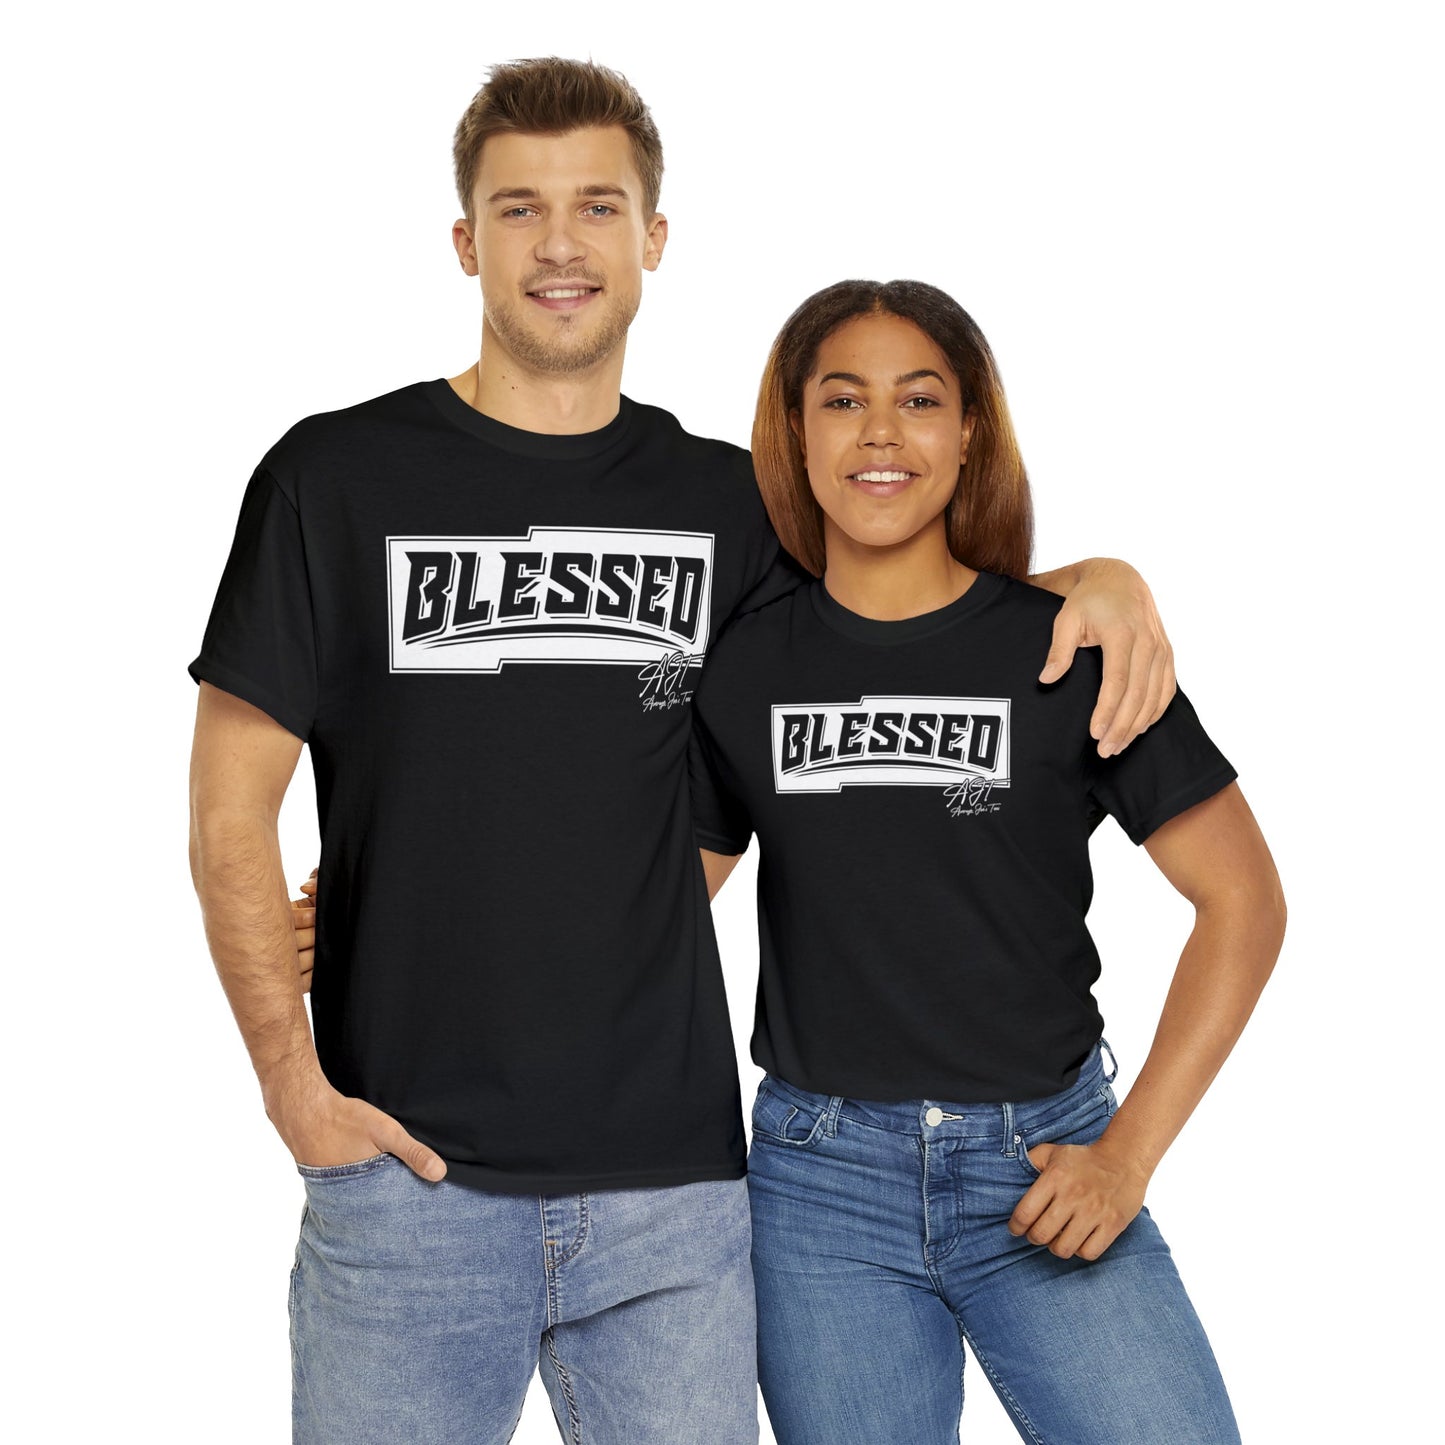 "Blessed" Heavy Cotton Tee